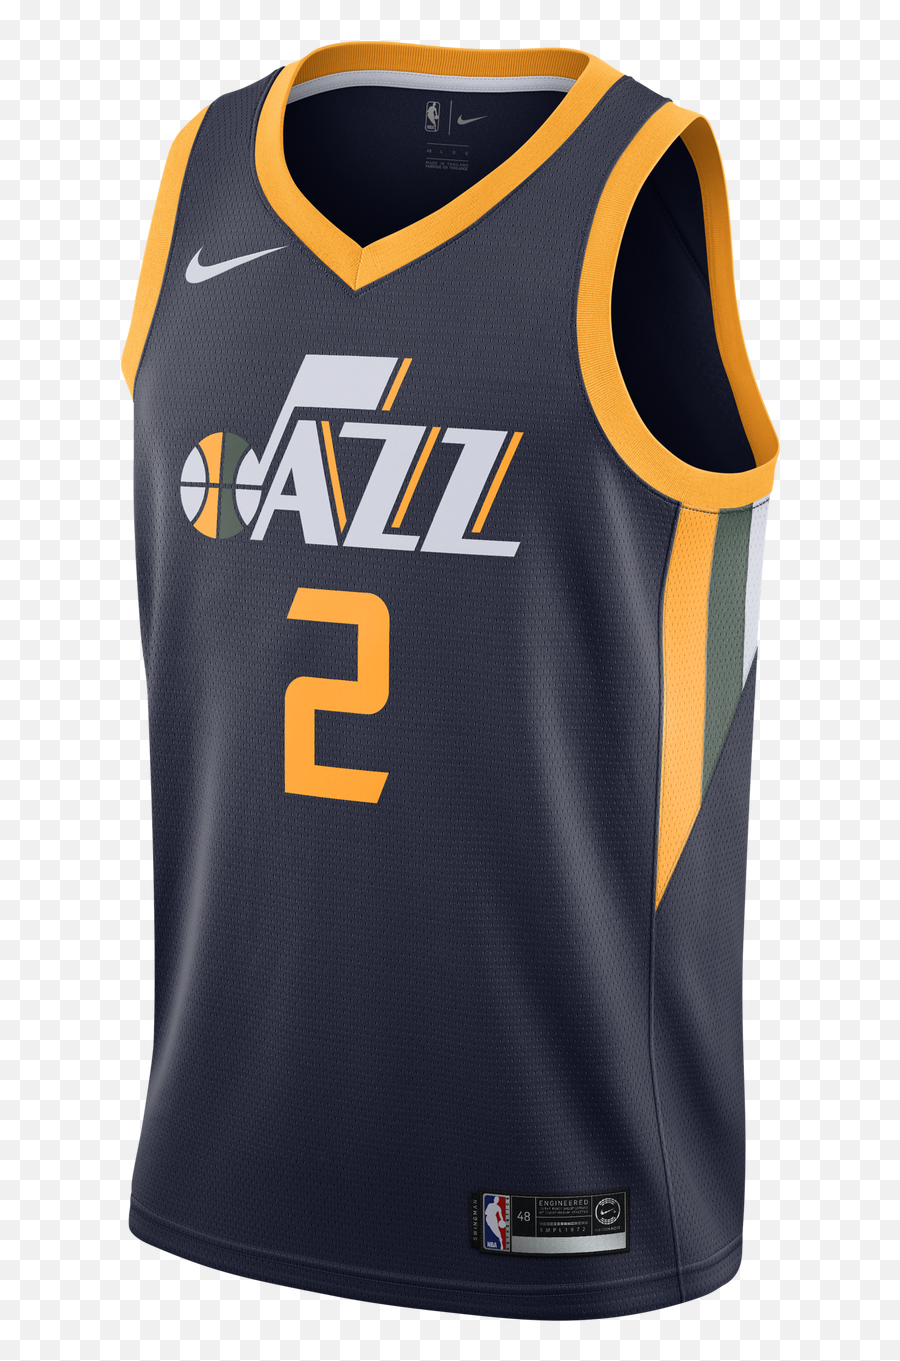 Donovan Mitchell Jersey Png Nike Icon 2 In 1